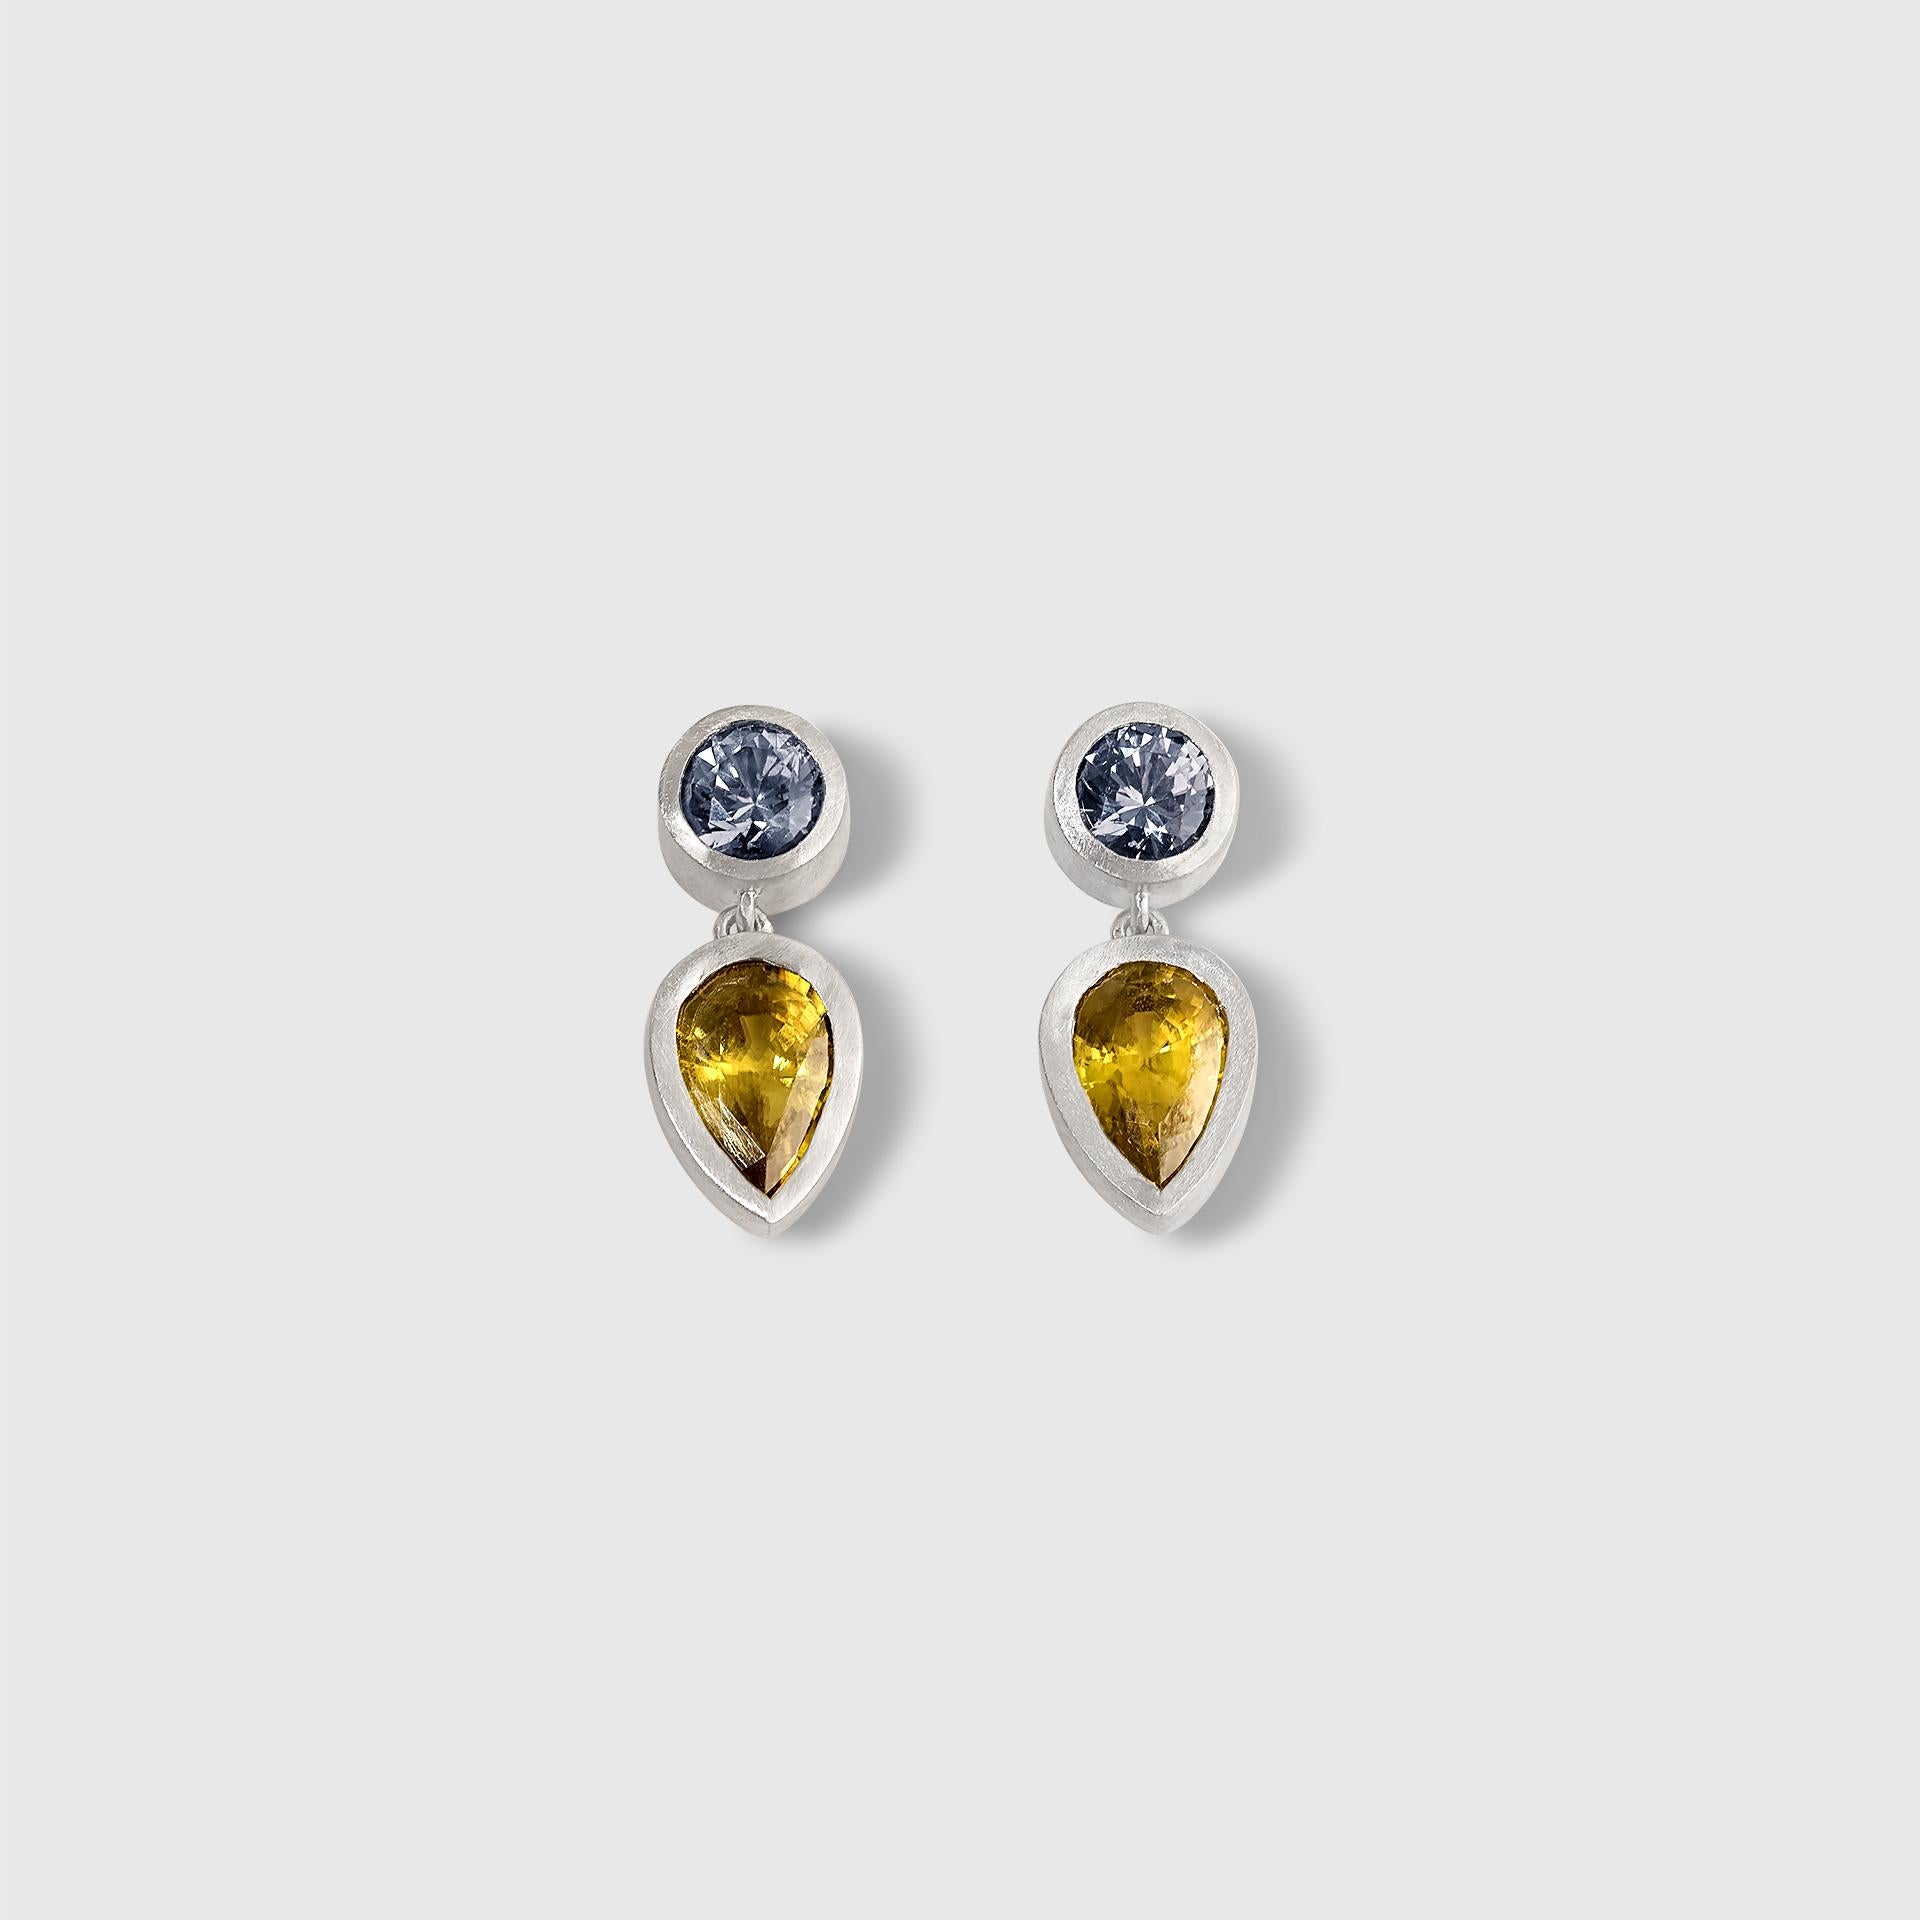 Spring Duet Earrings, Grey Spinels & Pear Shaped Yellow Sphenes 14kt White Gold In New Condition For Sale In Bozeman, MT